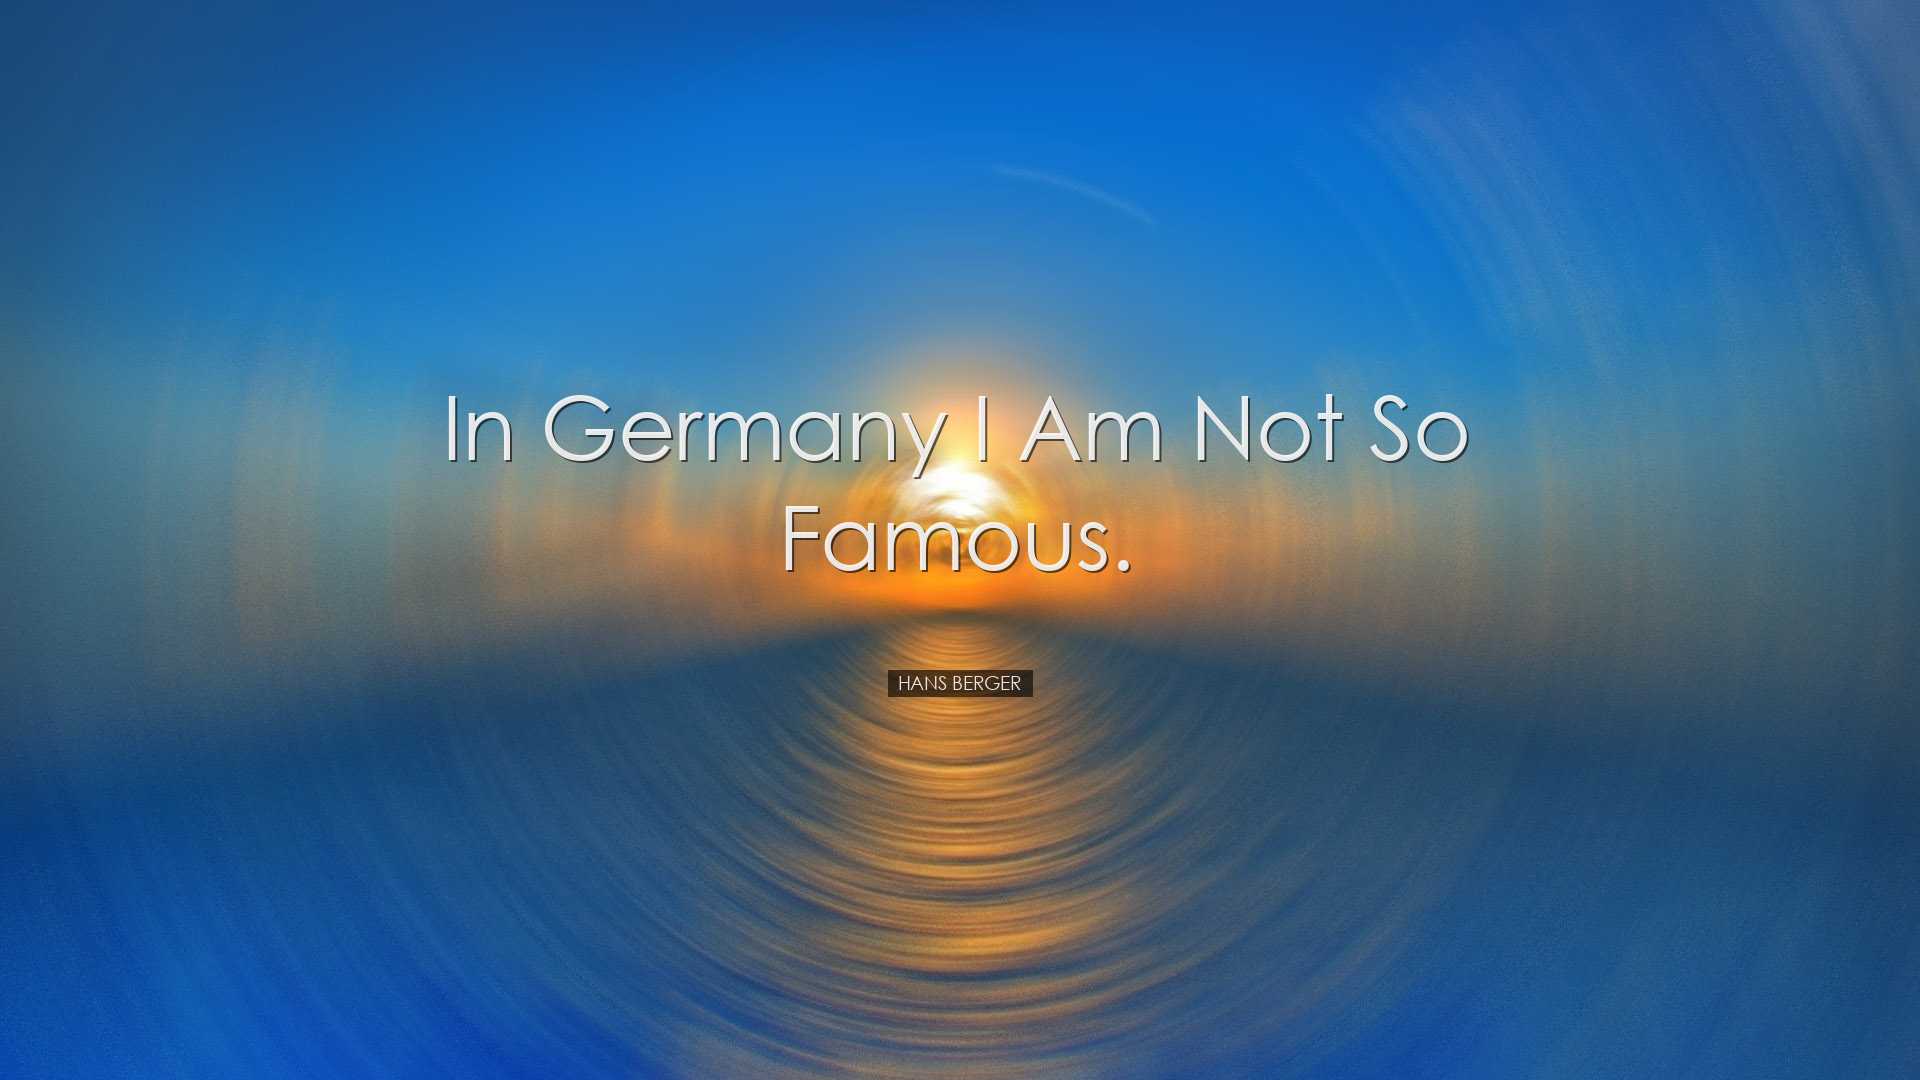 In Germany I am not so famous. - Hans Berger